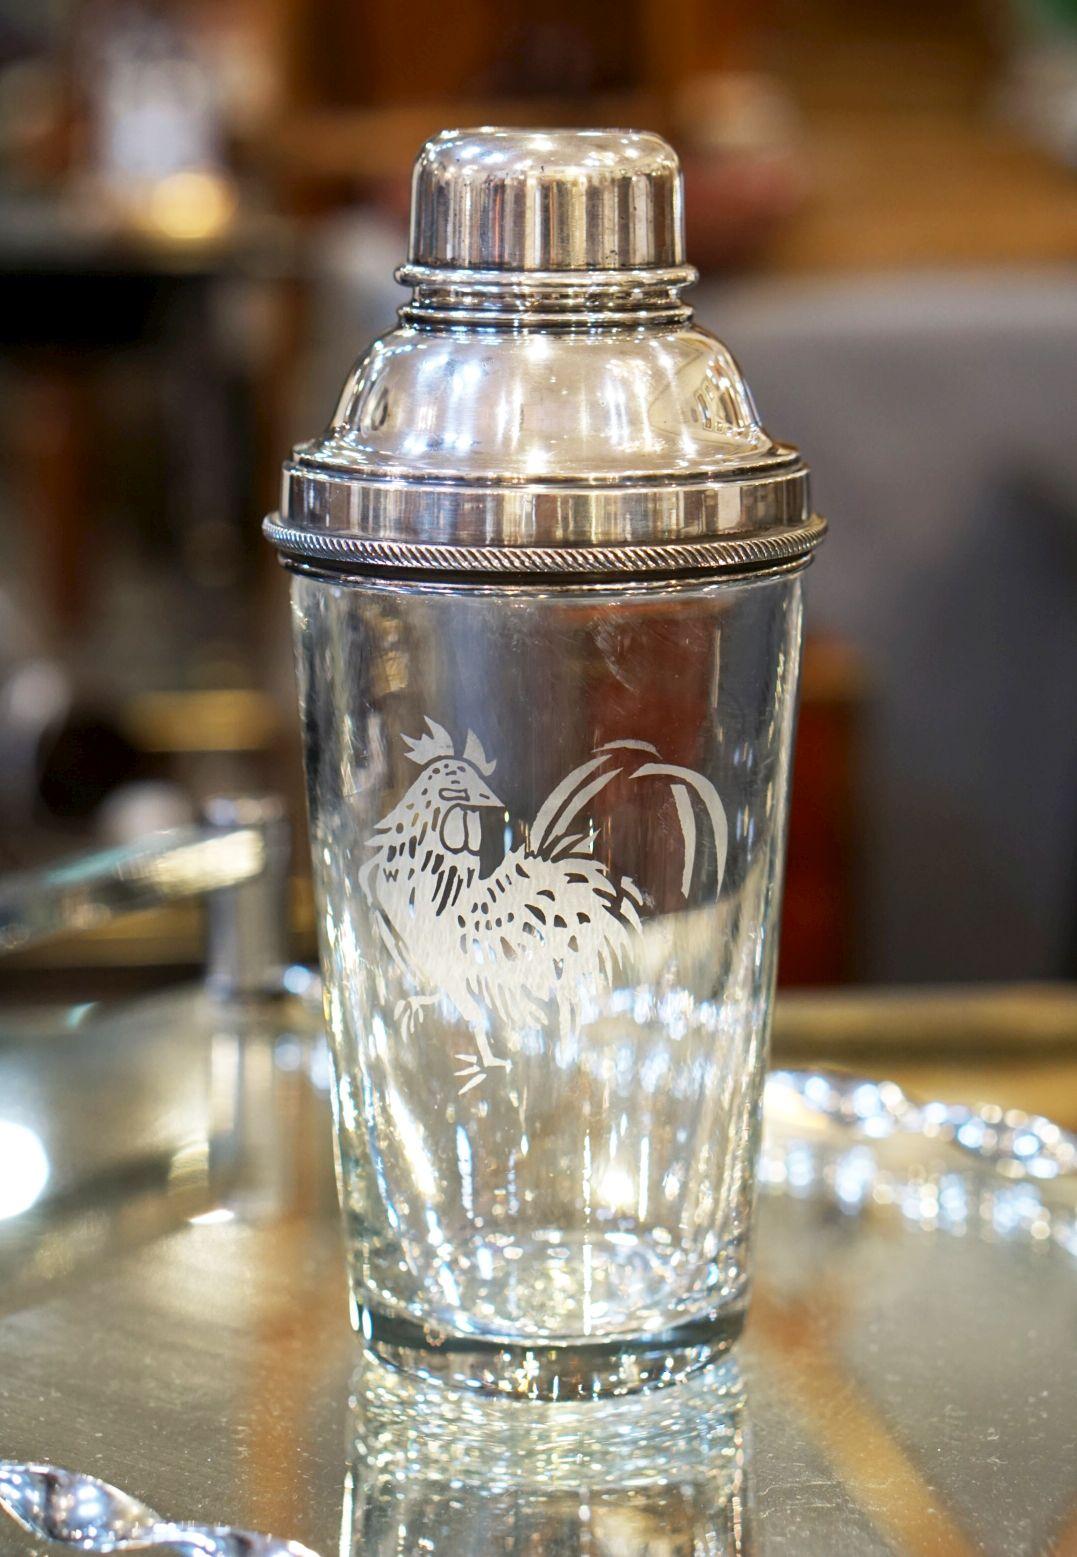 A large vintage English cocktail drinks or martini shaker with removable cap and strainer of fine plate silver, 1 pint, featuring an etched cockerel or rooster on a cylindrical tapering glass body.

Marked inside of cap: James Dixon and Sons